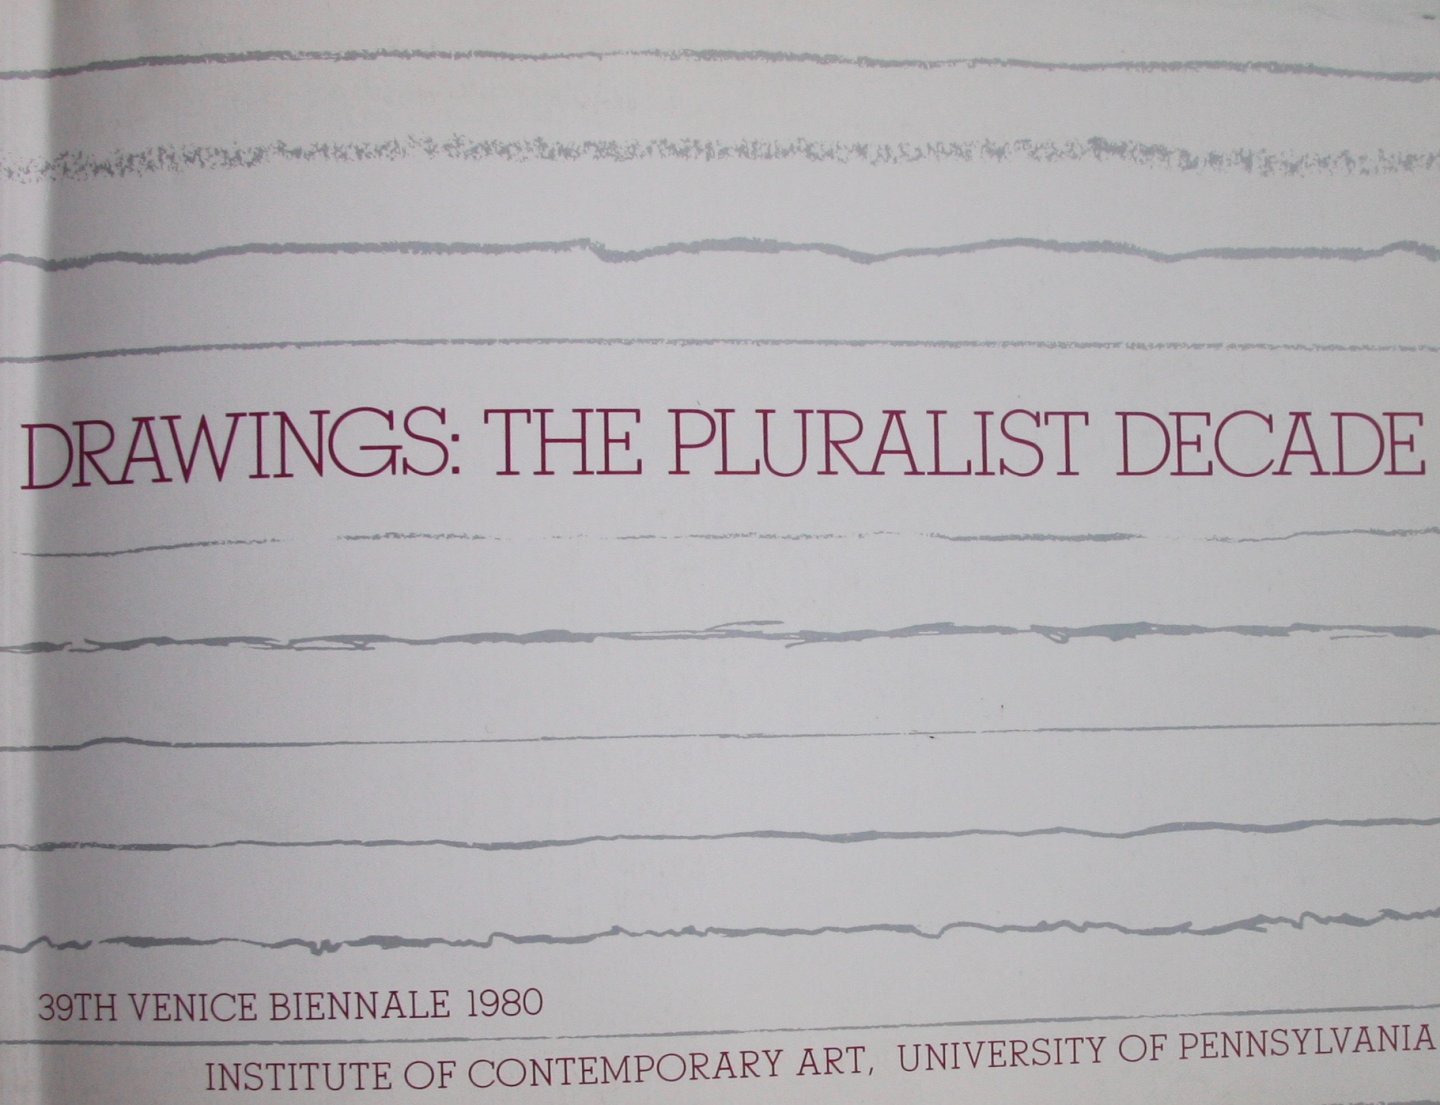 Kardon, Janet - Drawings The Pluralist Decade  (with appendix)